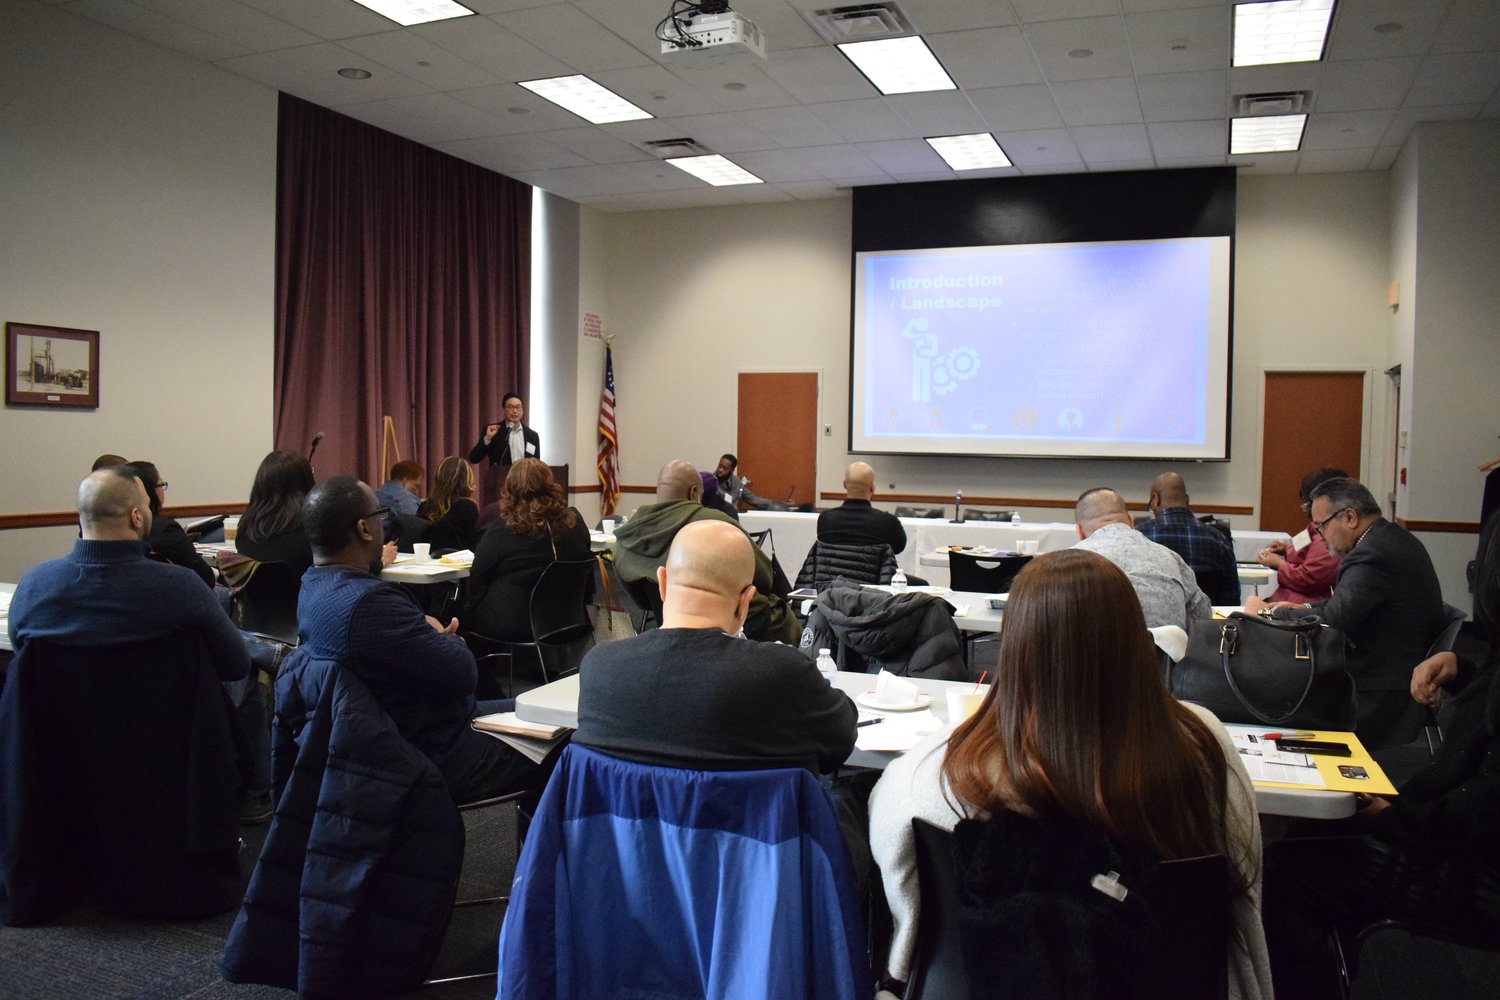 More than two dozen residents and community leaders discussed how to groom millennials to become local leaders during the “Roundtable on Reaching, Engaging and Retaining Millennials” at Elmont Memorial Library on Jan. 19.